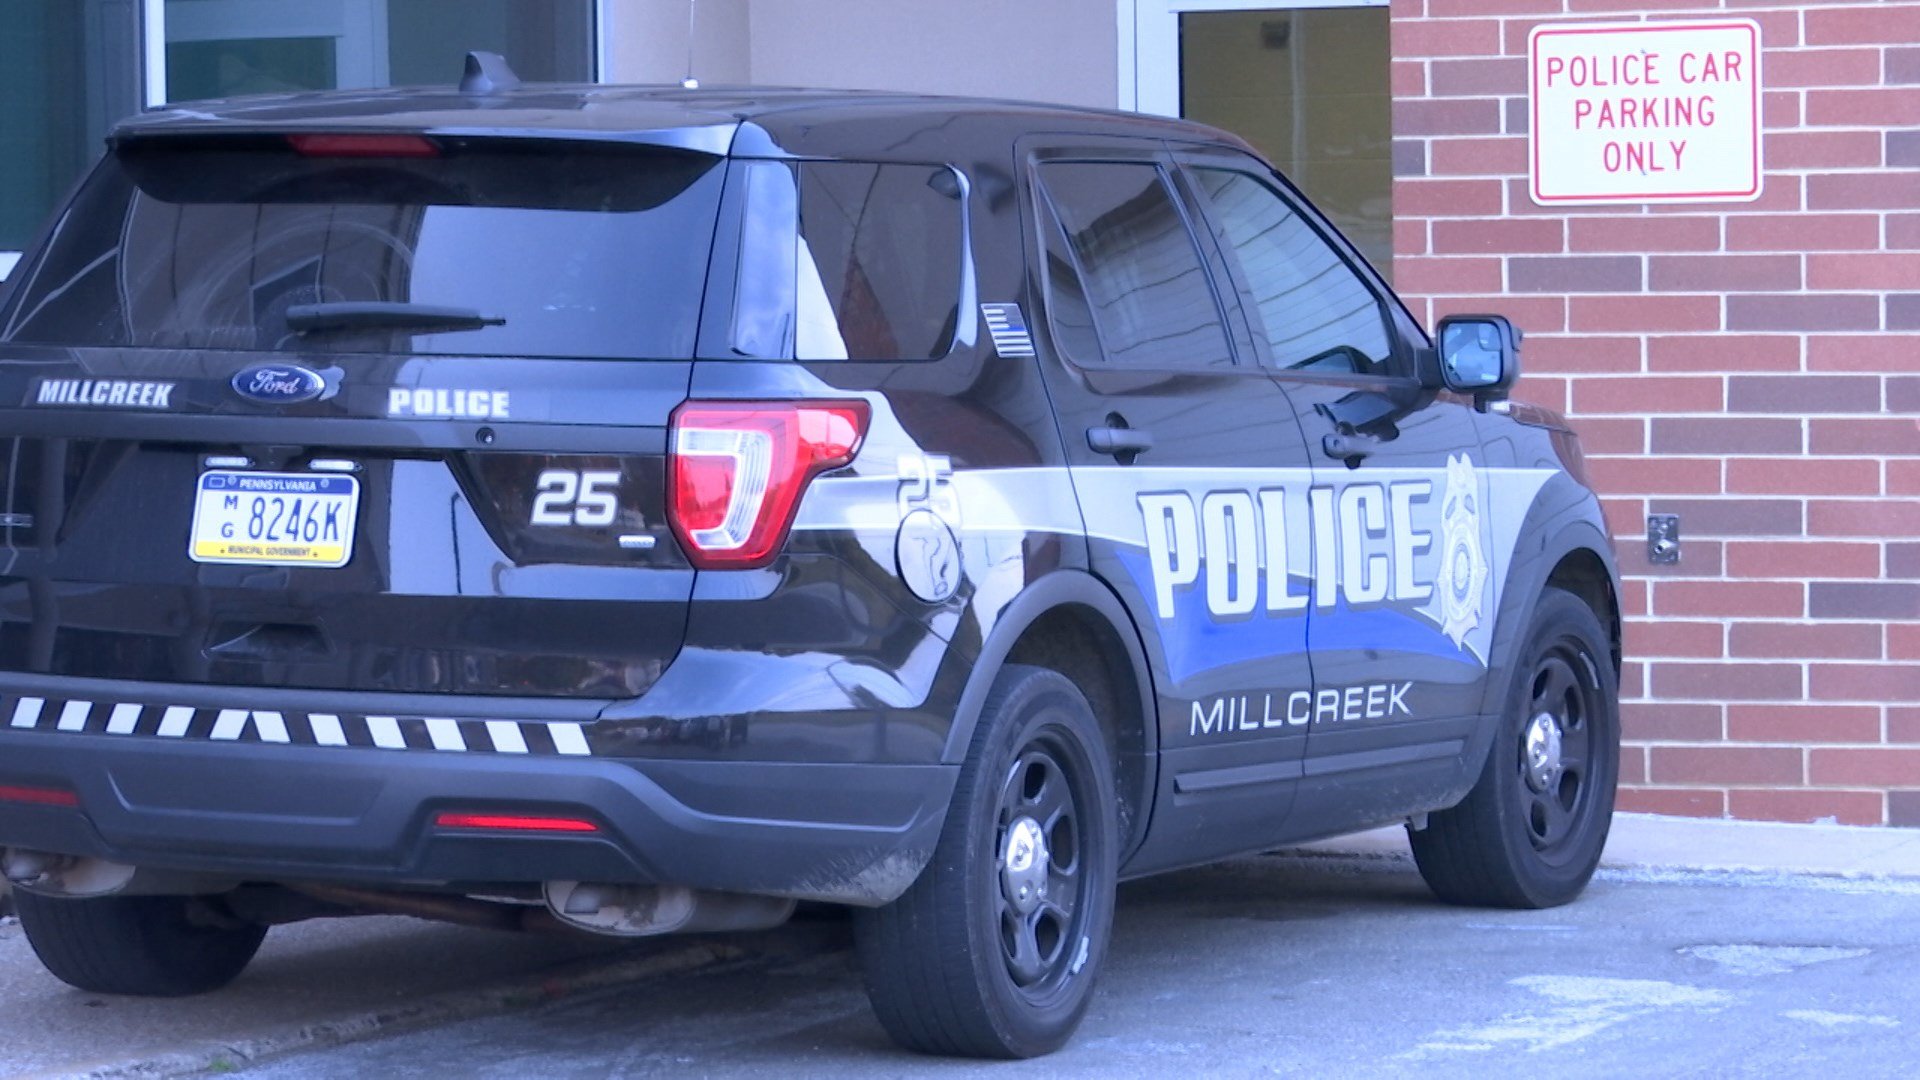 Millcreek Police Launch New App for Anonymous Tips, Alerts and More